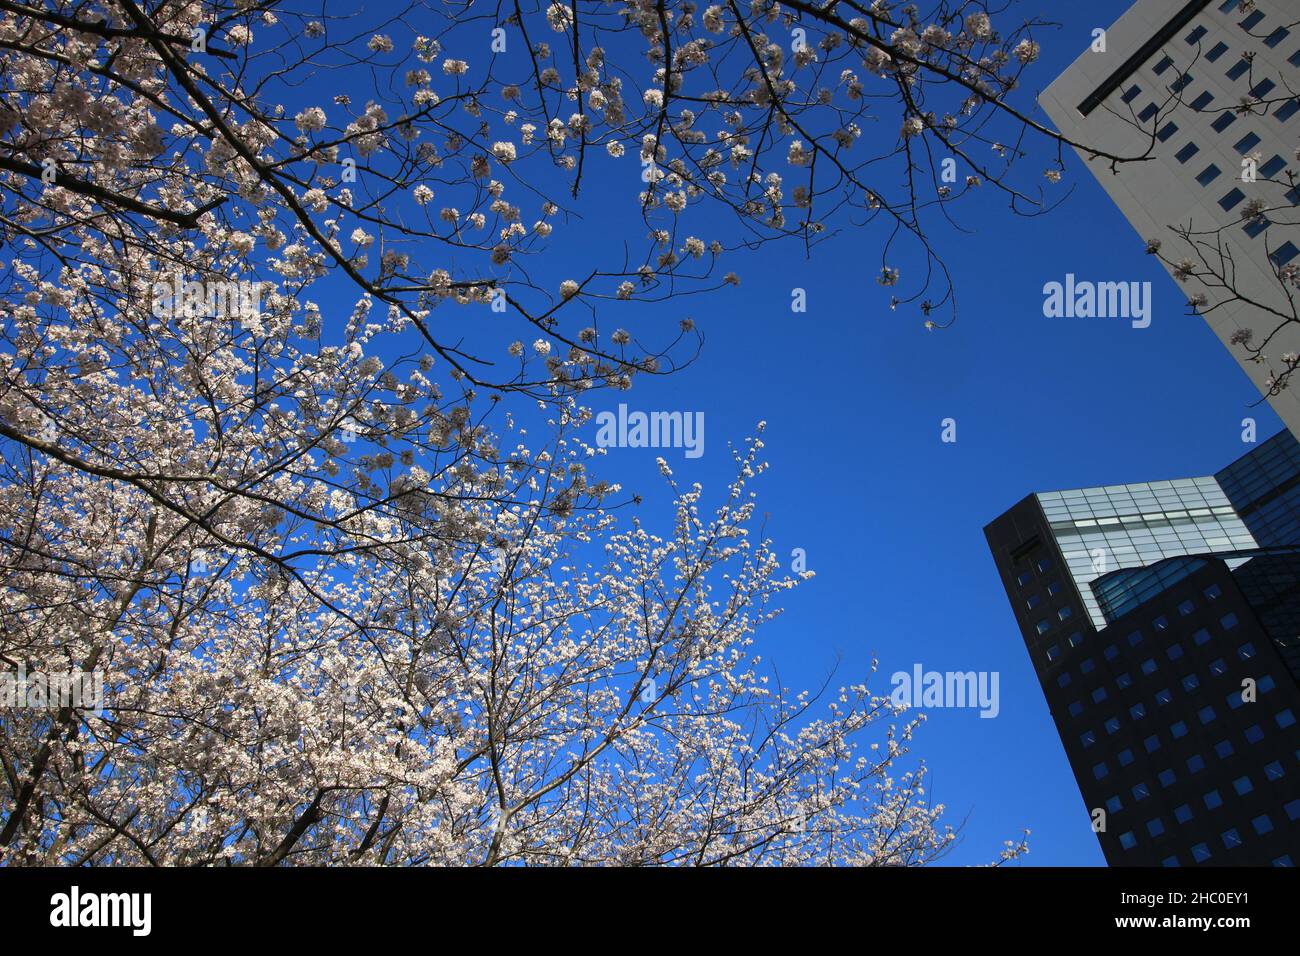 Landscape of Japanese city where cherry blossoms bloom Stock Photo